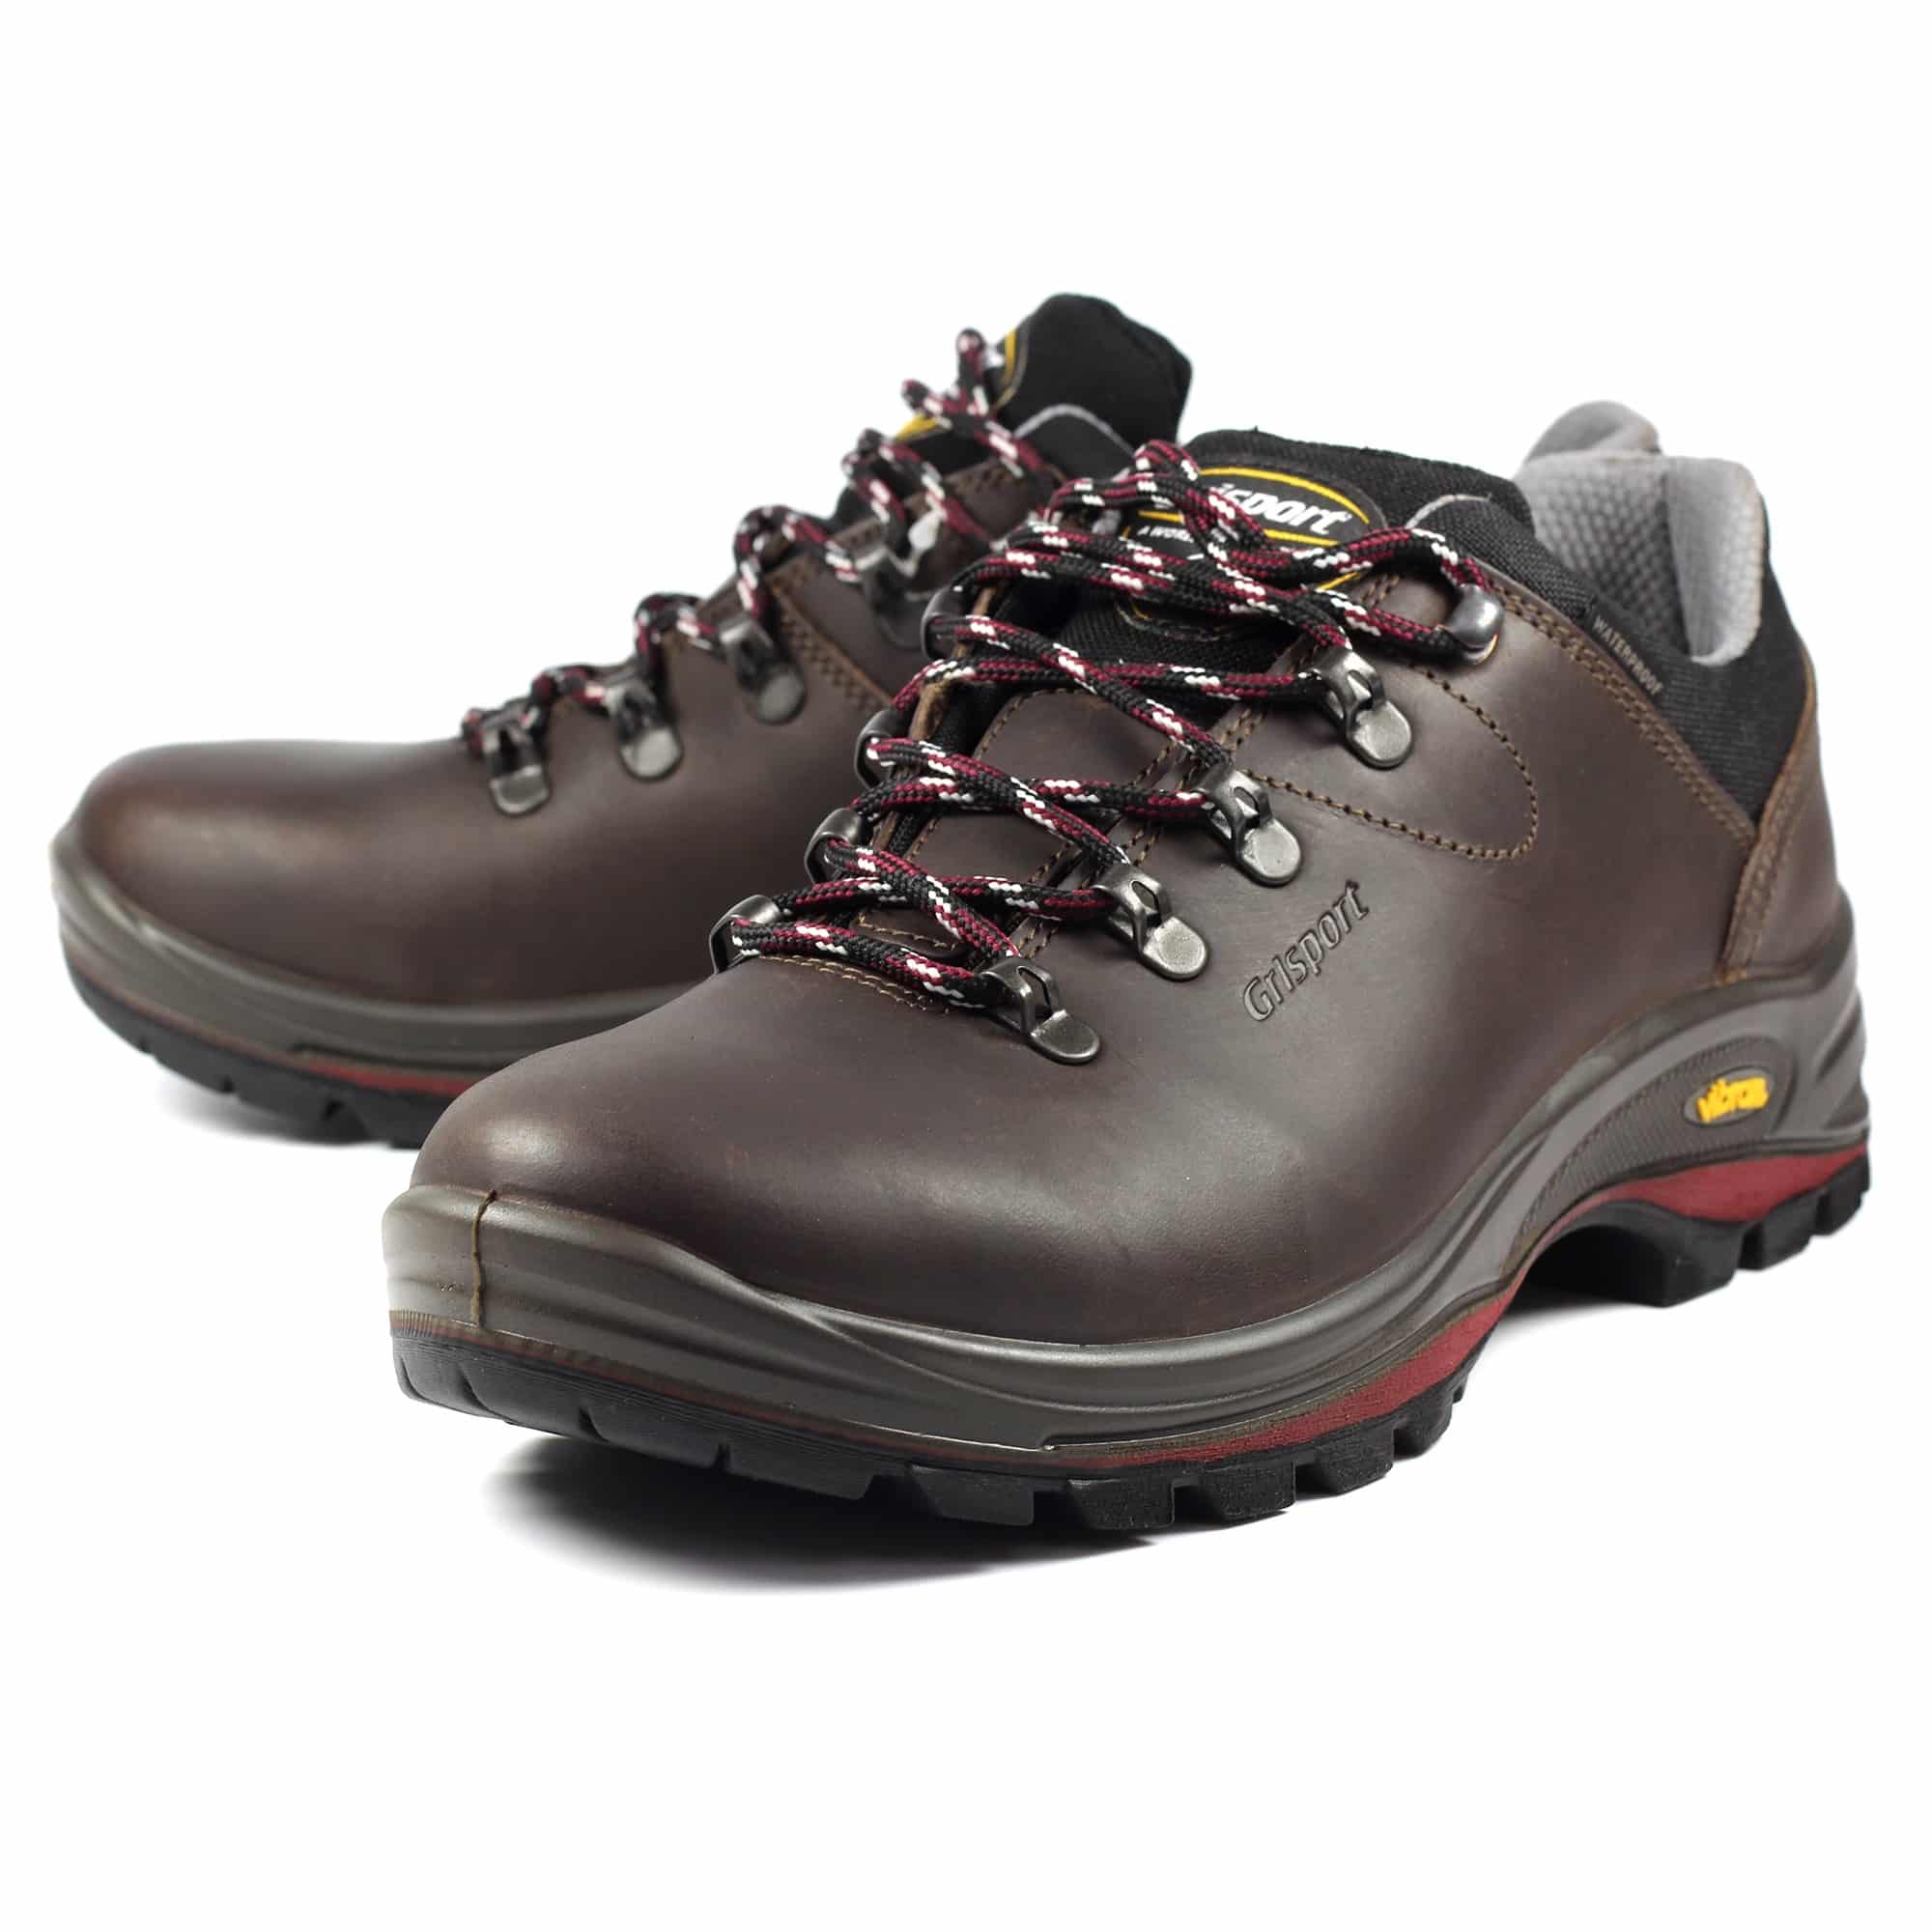 photo of grisport gtx walking shoes brown